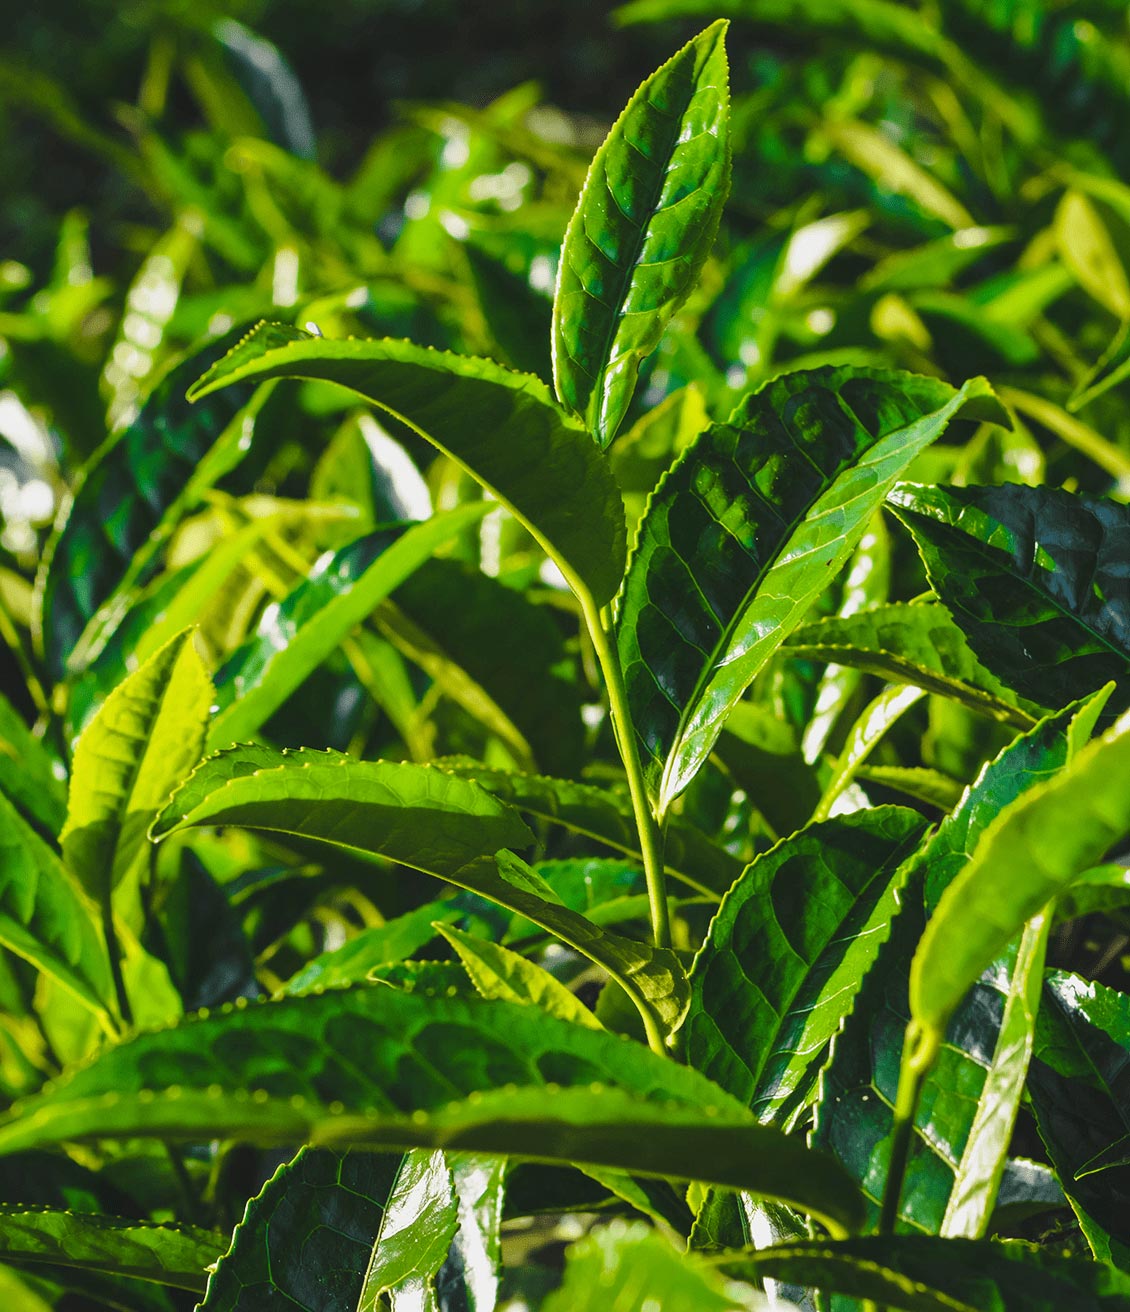 Green tea comes from the leaves of Camelia Sinensis